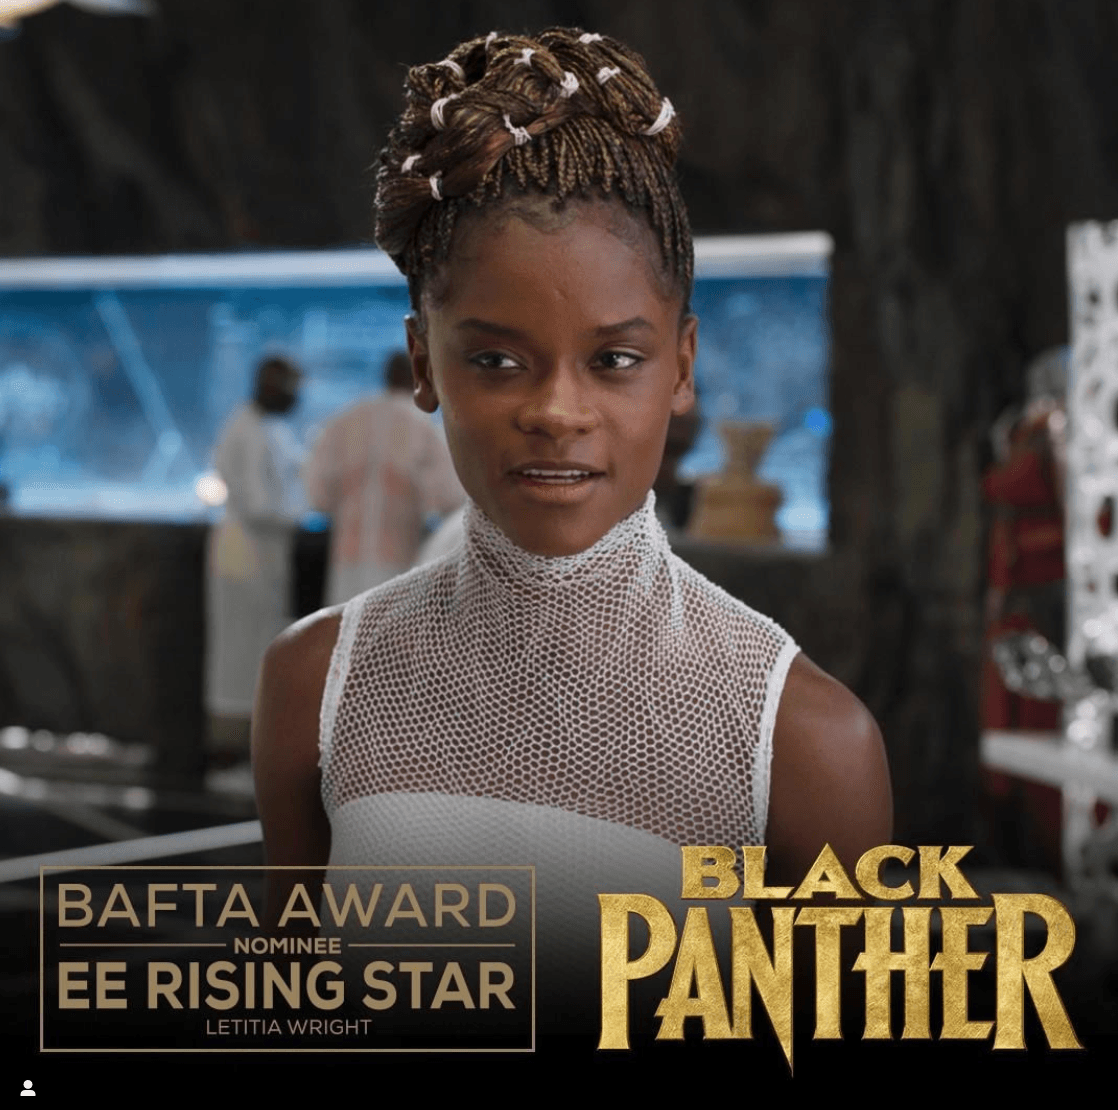 Filming for ‘Black Panther’ sequel paused after Letitia Wright set injury